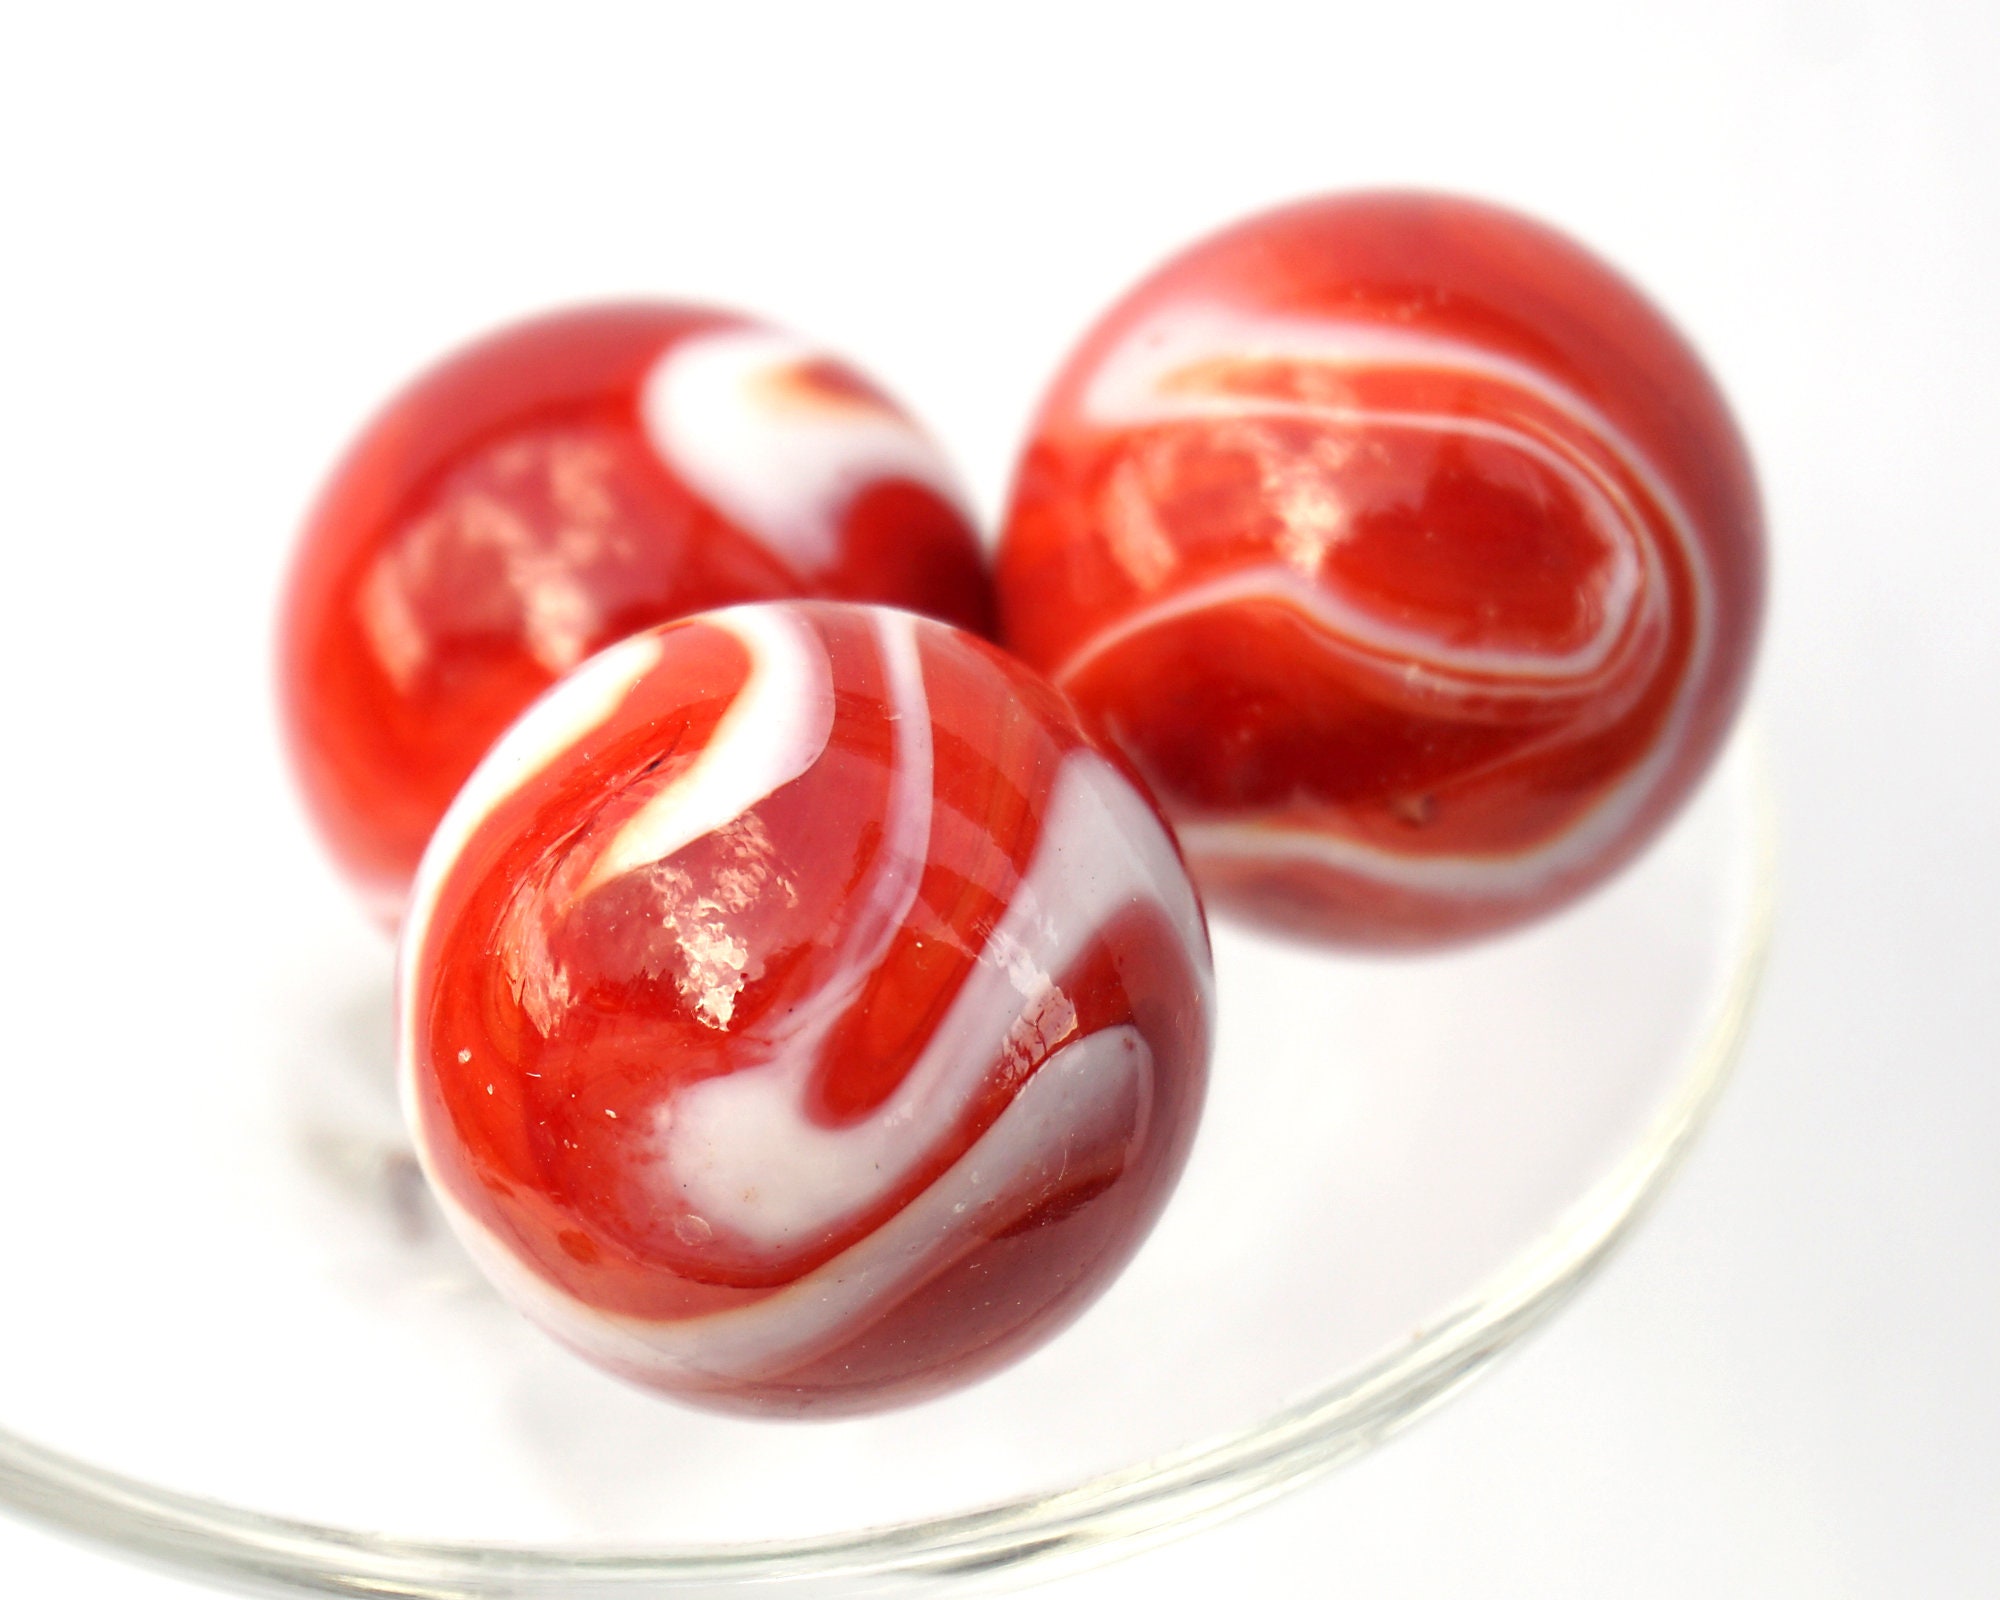 Vintage German Glass Marble 22mm, Red and White Swirl Marble, Big Glass  Ball, Vintage Marble in Perfect Condition 